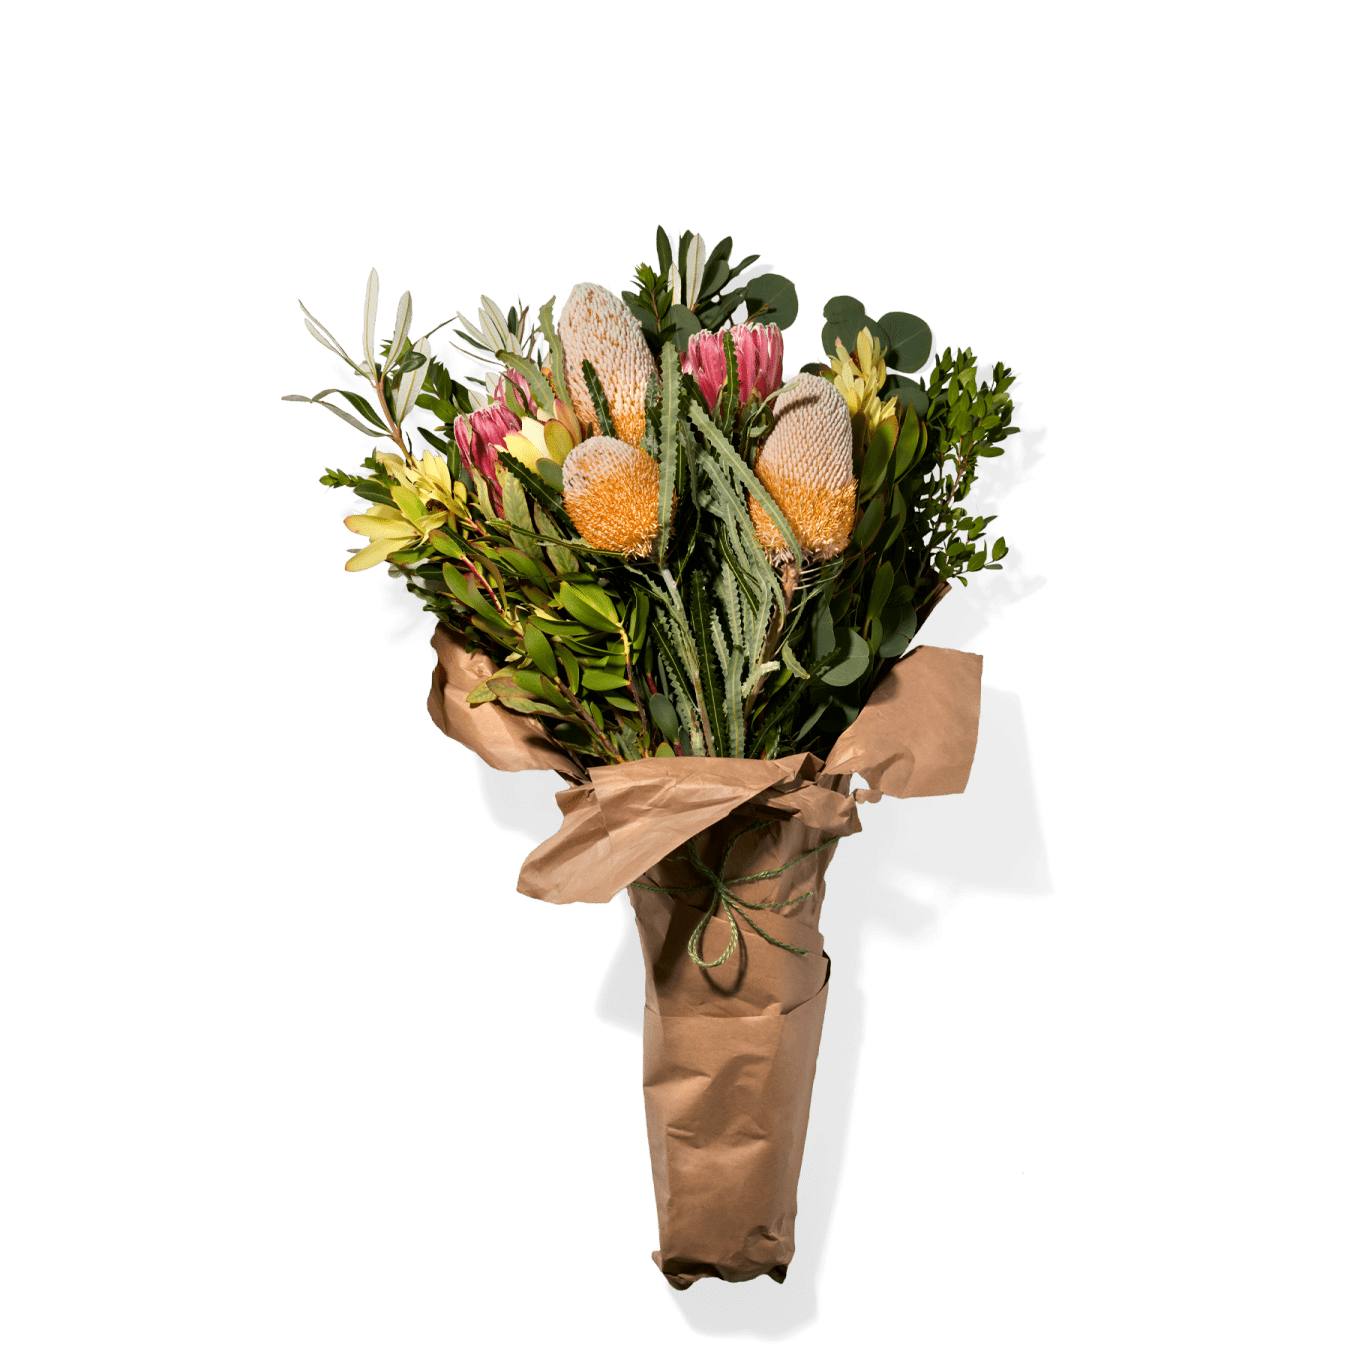 Vibrant Bouquet Of Assorted Flowers And Greenery, Arranged In Rustic-Style Paper Wrapping